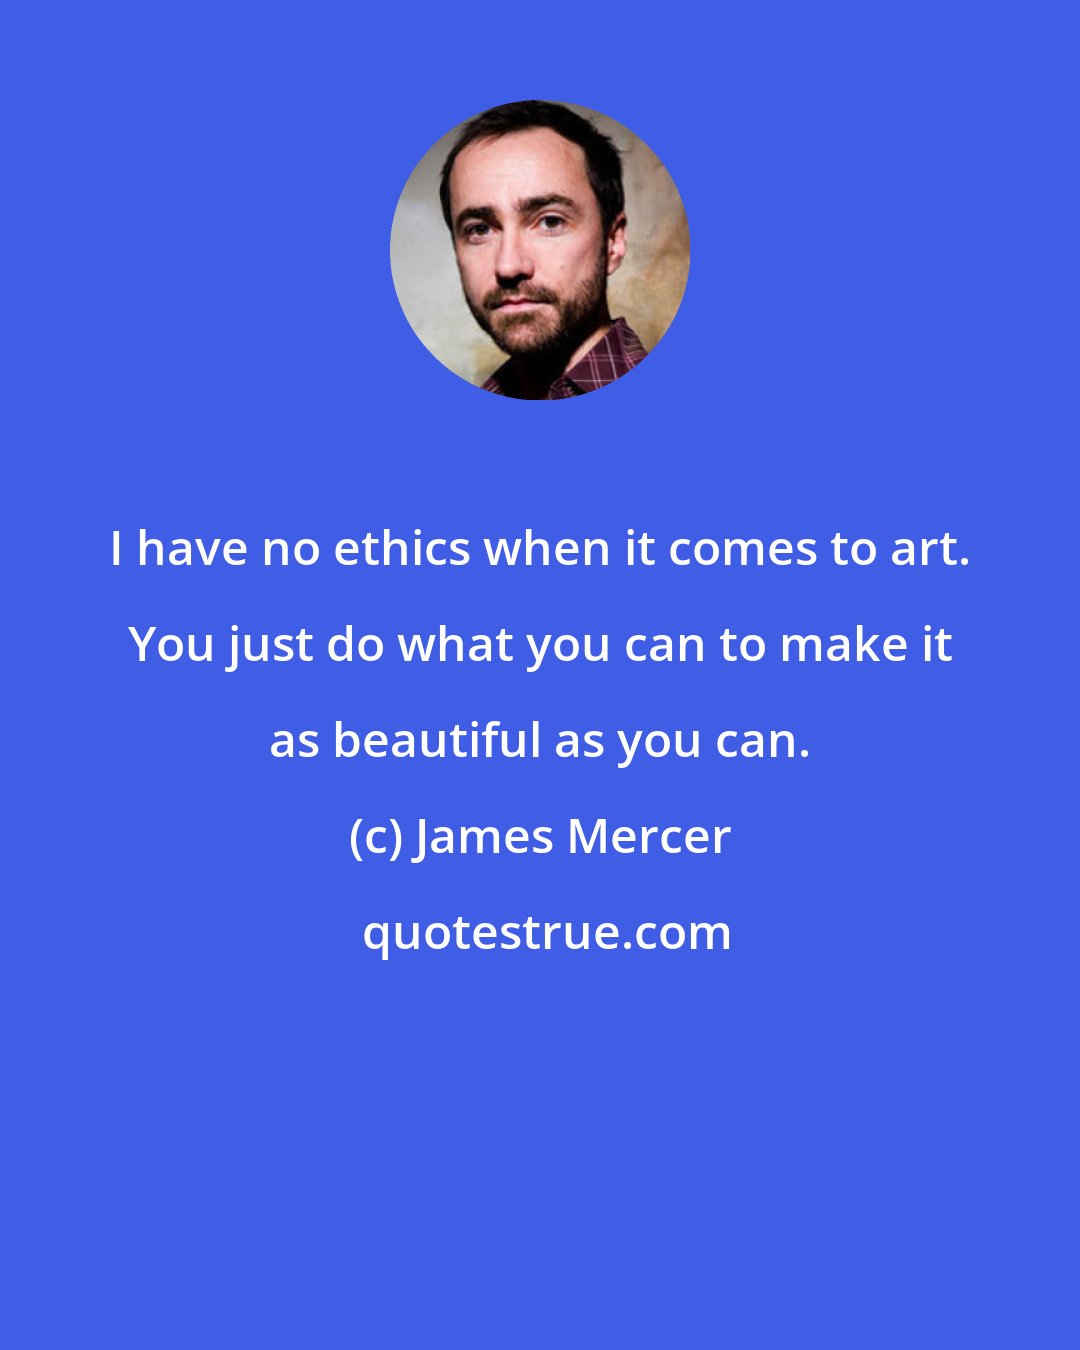 James Mercer: I have no ethics when it comes to art. You just do what you can to make it as beautiful as you can.